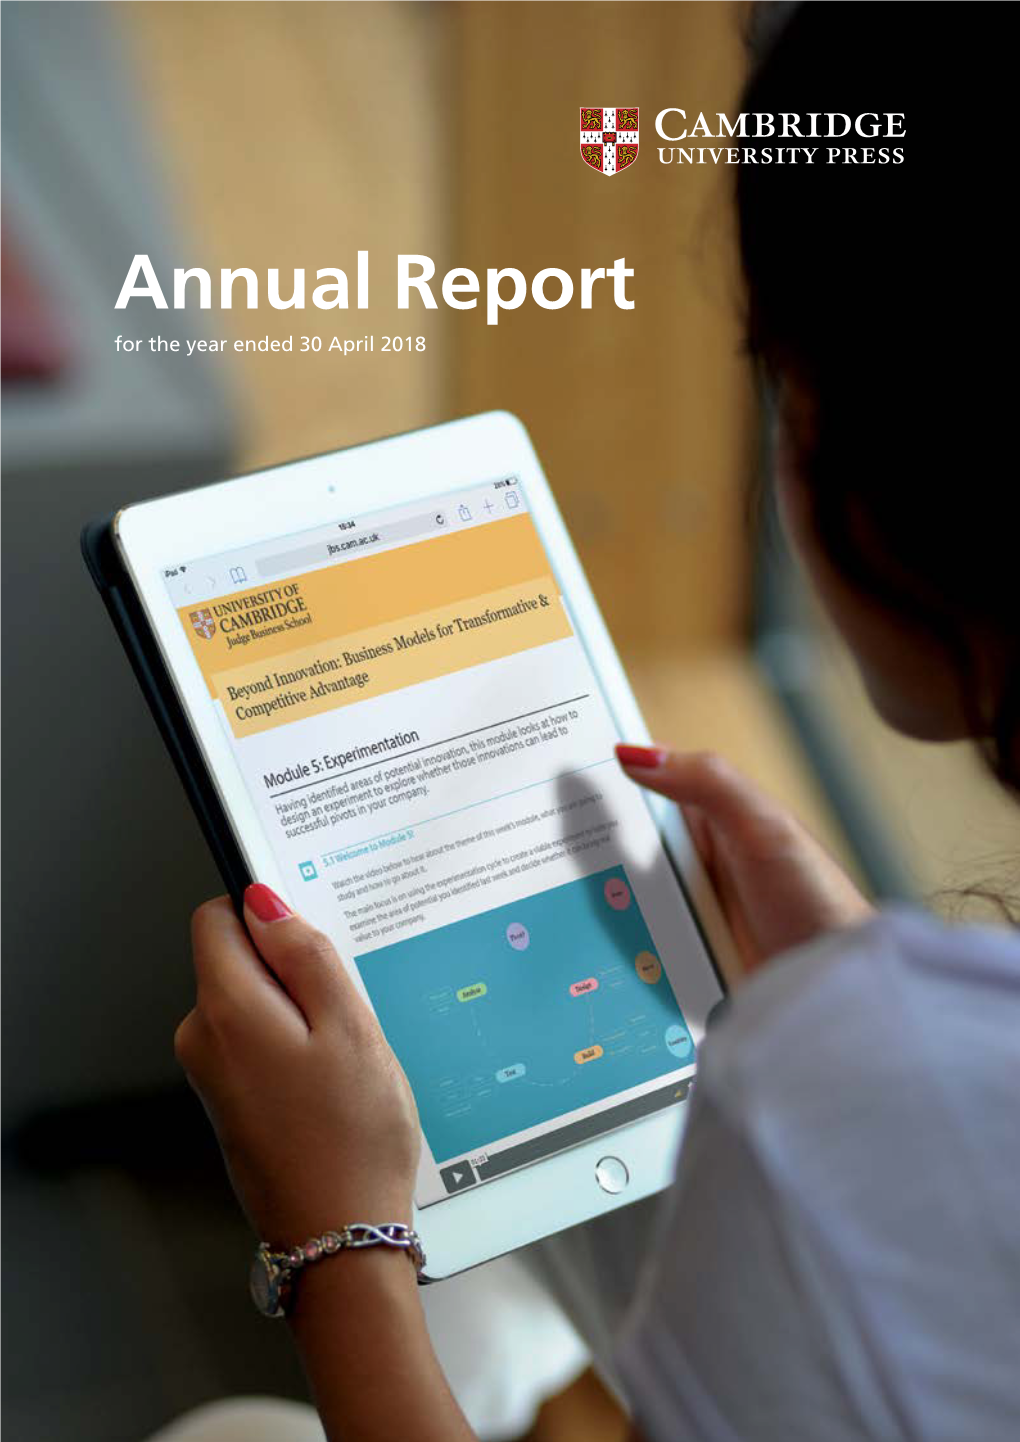 Annual Report for the Year Ended 30 April 2018